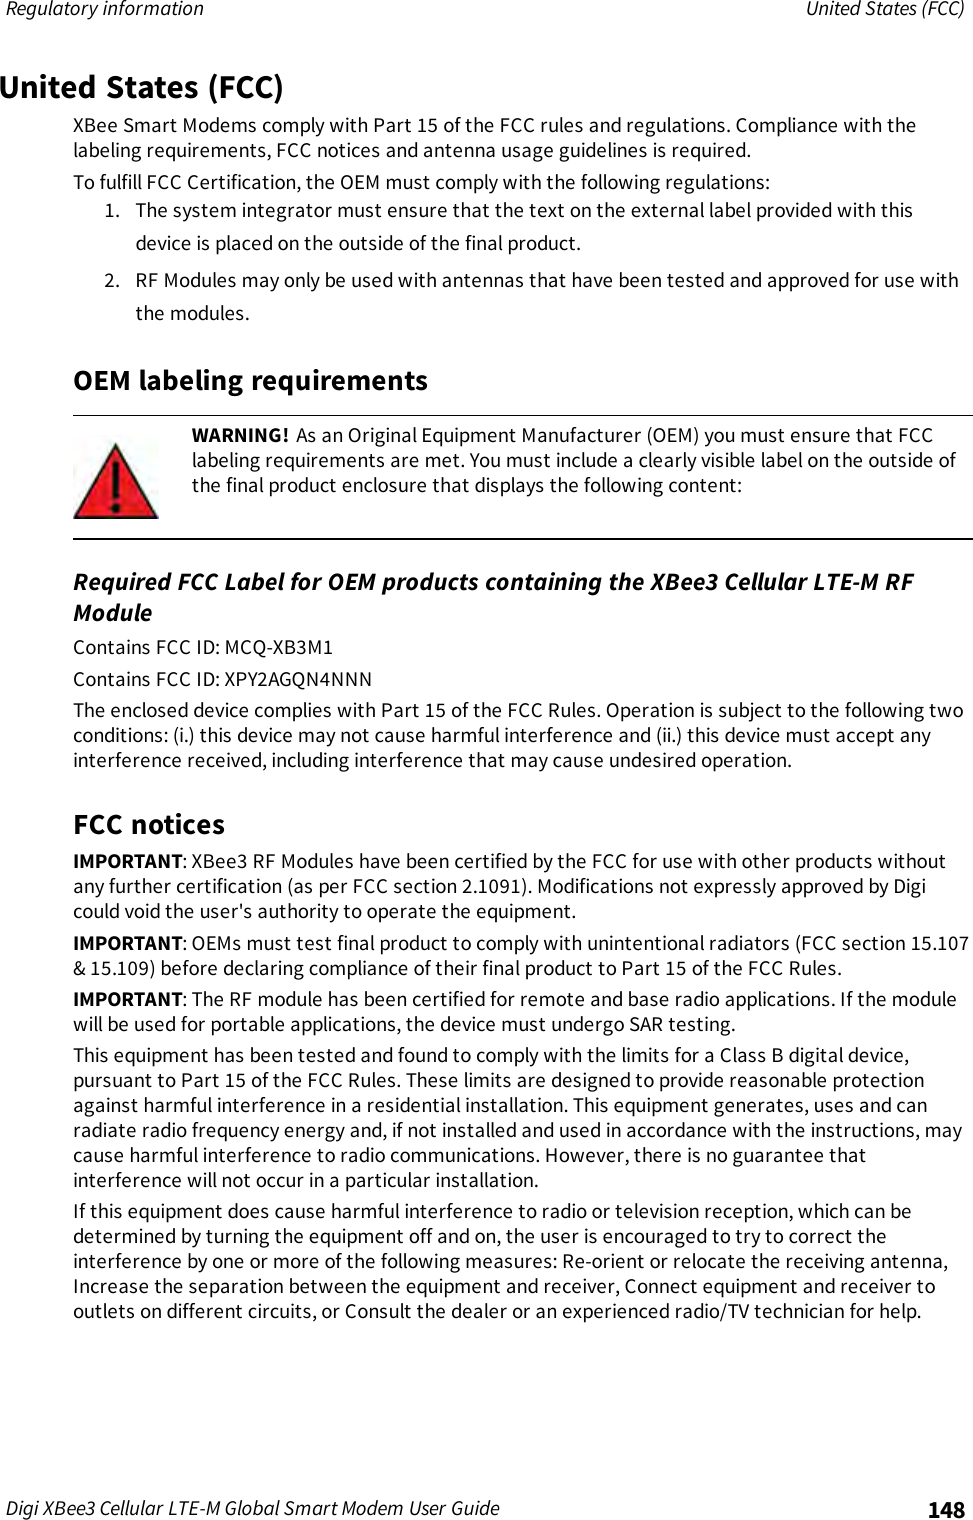 Page 148 of Digi XB3M1 XBee3 Cellular LTE-M User Manual 